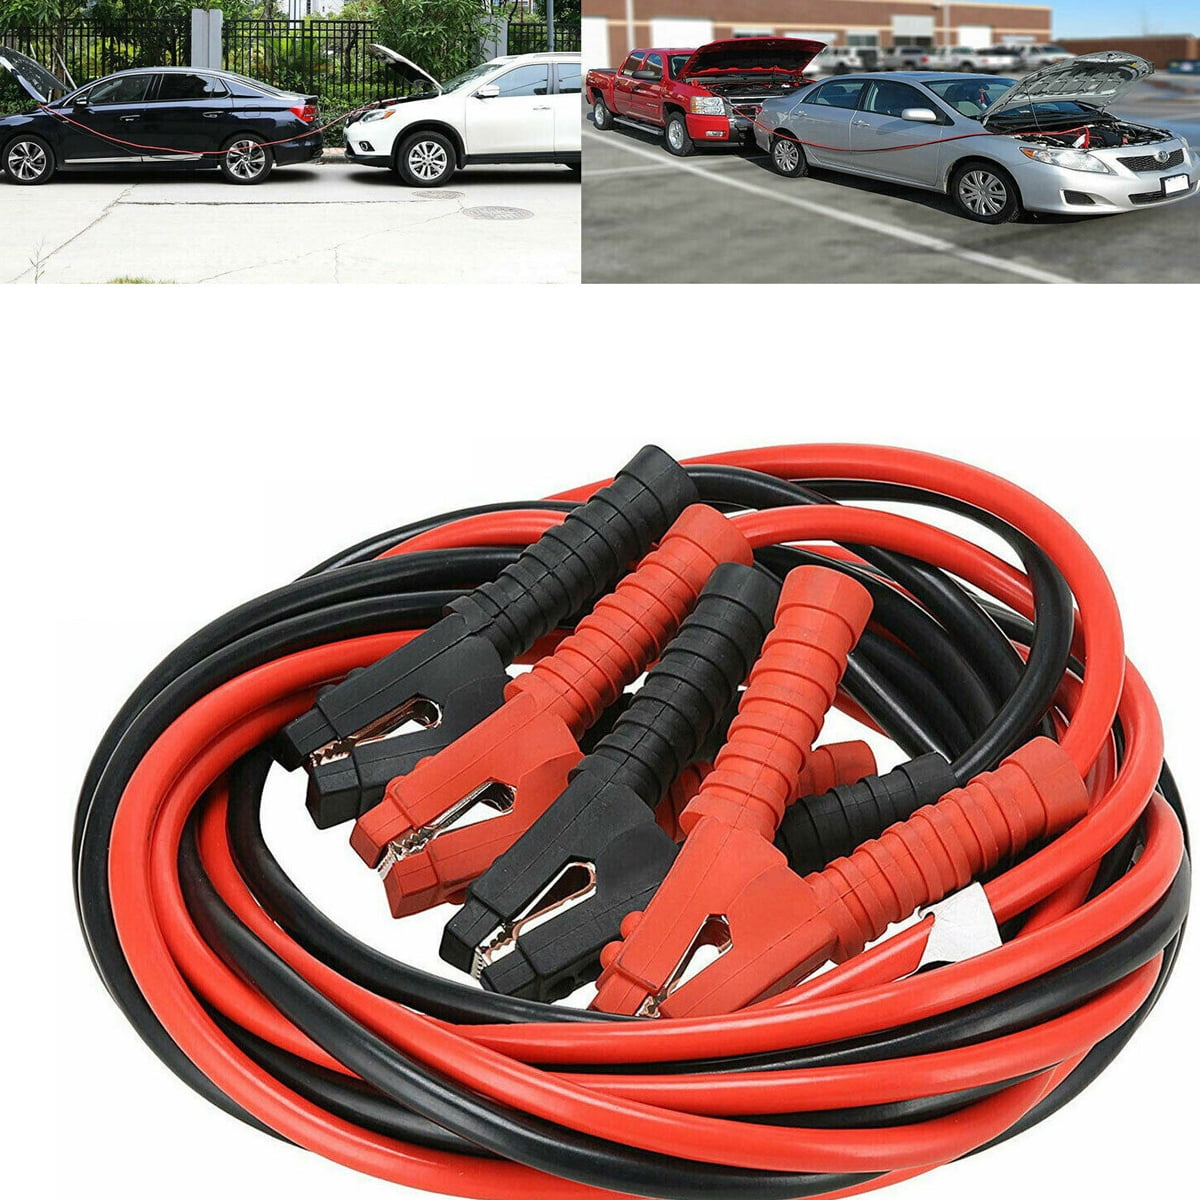 Holdfiturn 6M Booster Cables 3000Amp Heavy Duty Cars Jump Leads